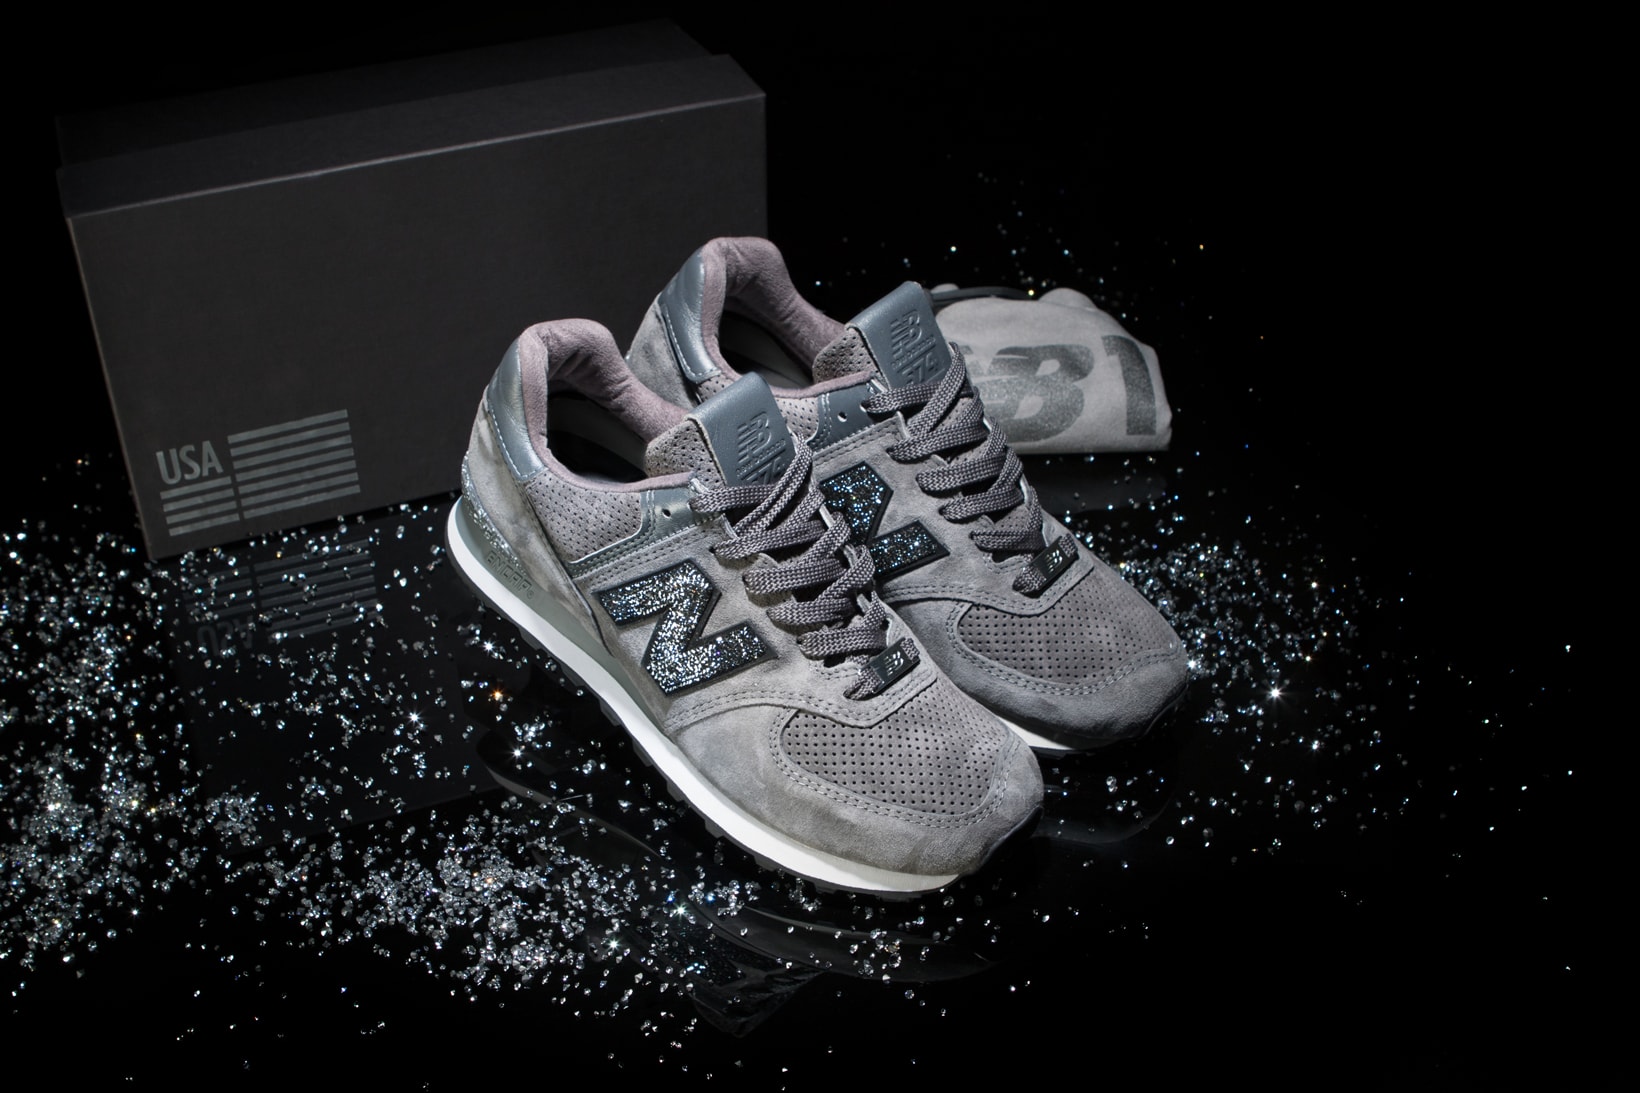 new balance 574 swarovski crystals footwear sneakers shoes jewelry collaboration